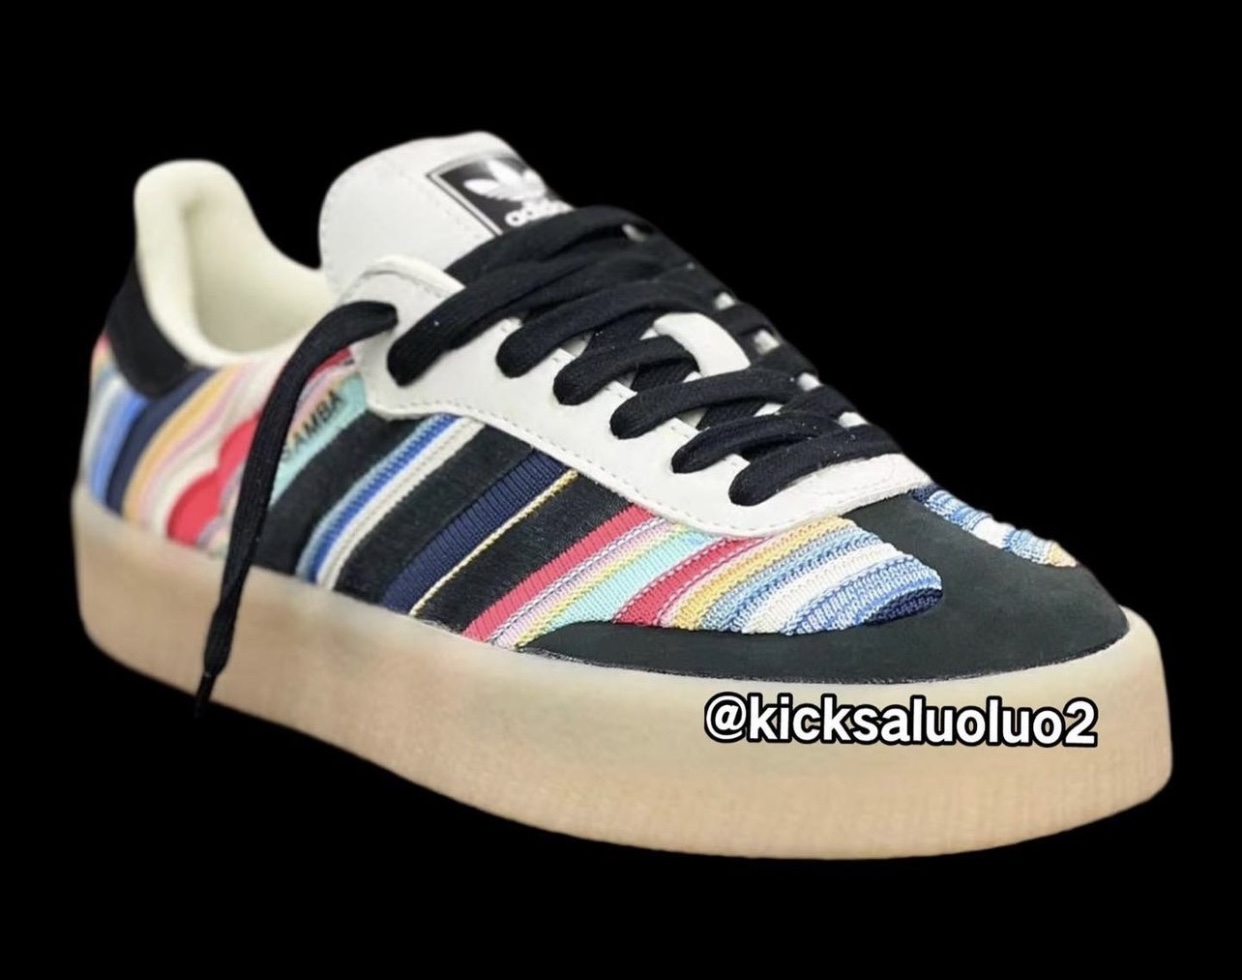 Ksenia Schnaider adidas clear Samba 2.0 first look release info date pricing photos